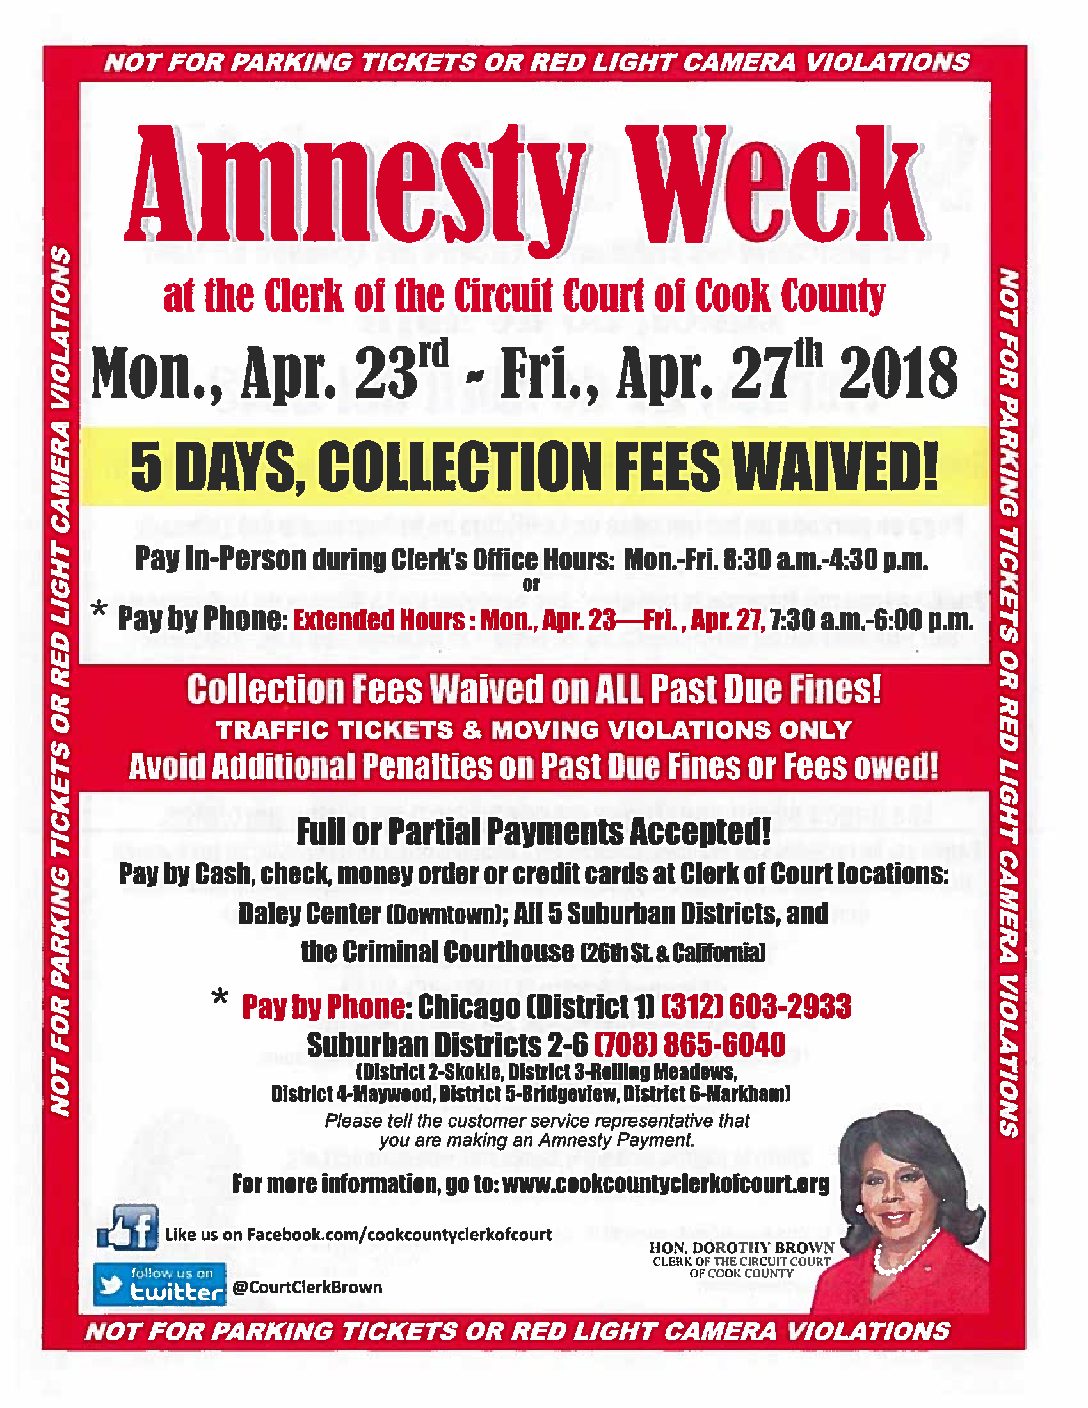 Amnesty Week at the Clerk of the Circuit Court of Cook County